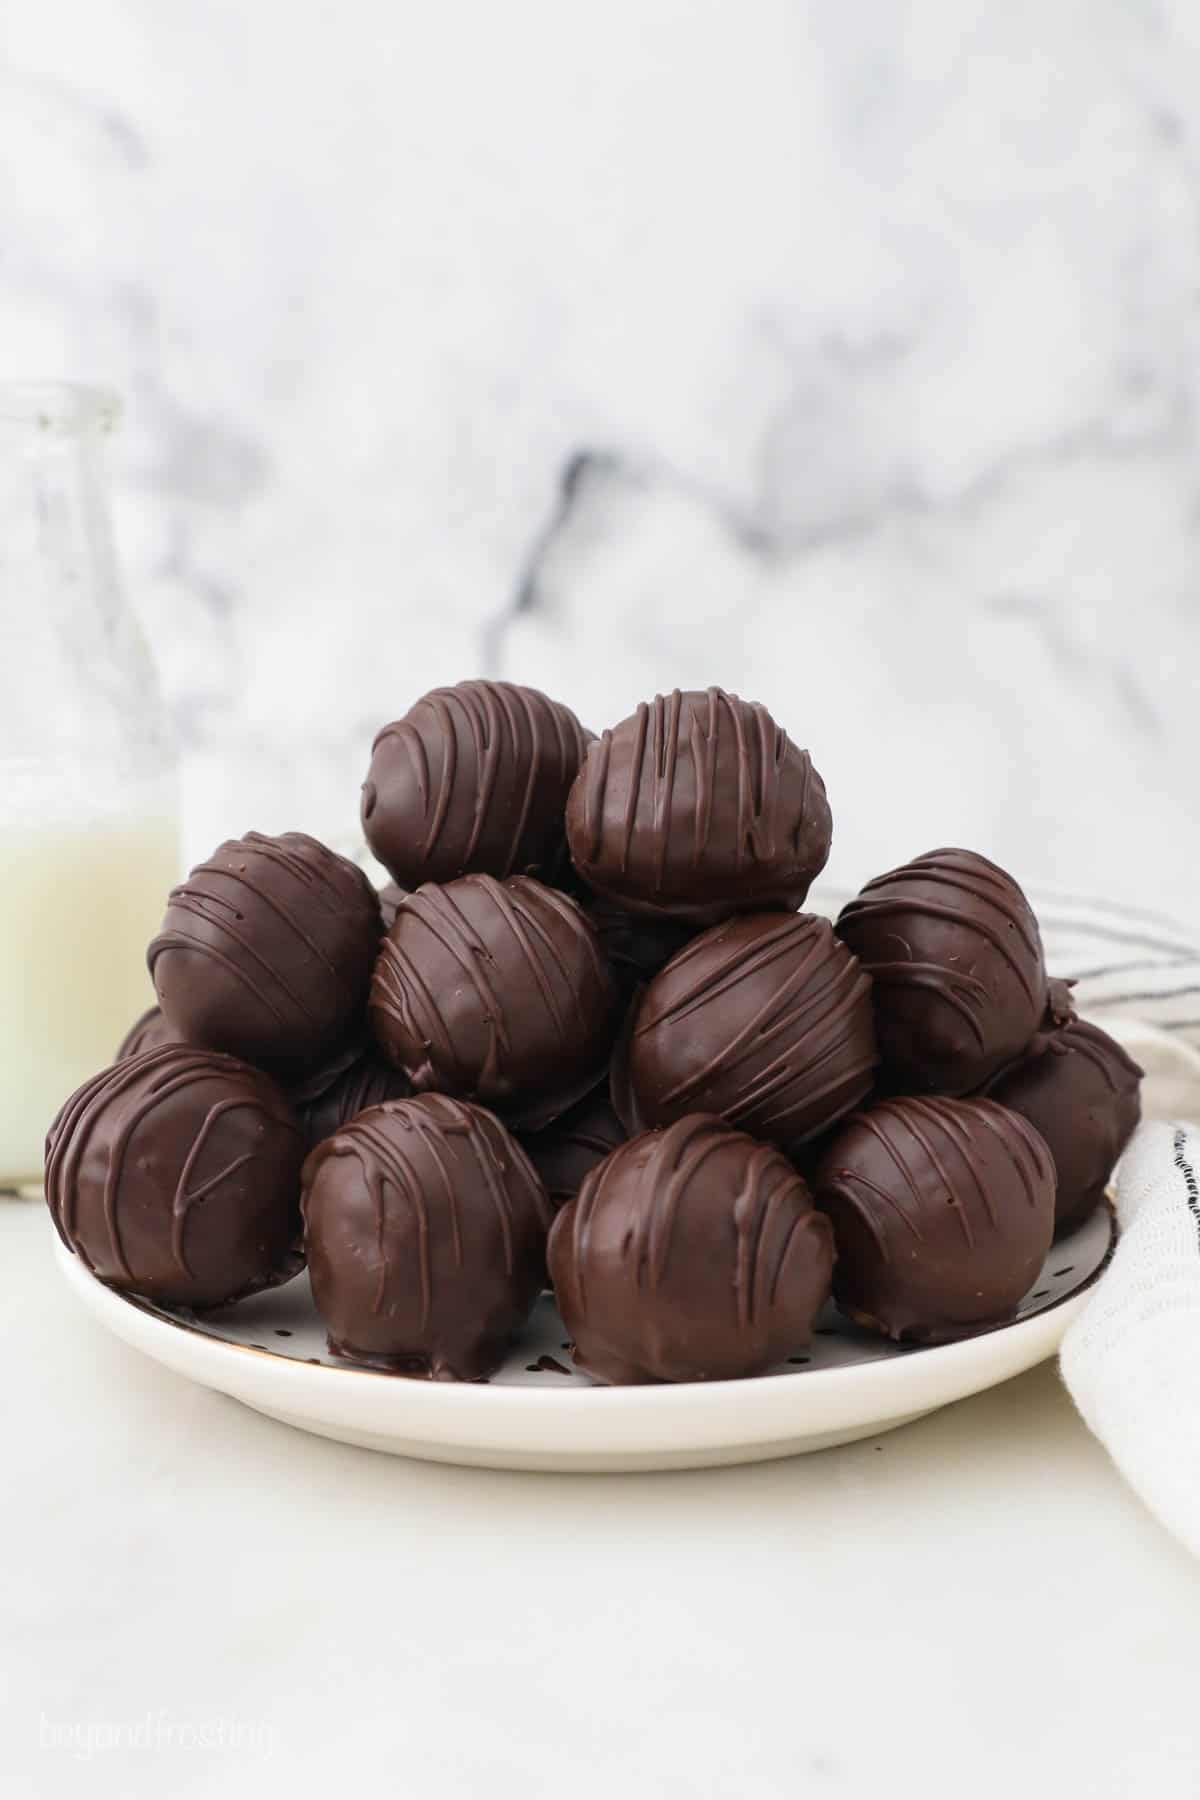 A plate piled high with peanut butter balls decorated with a dark chocolate drizzle